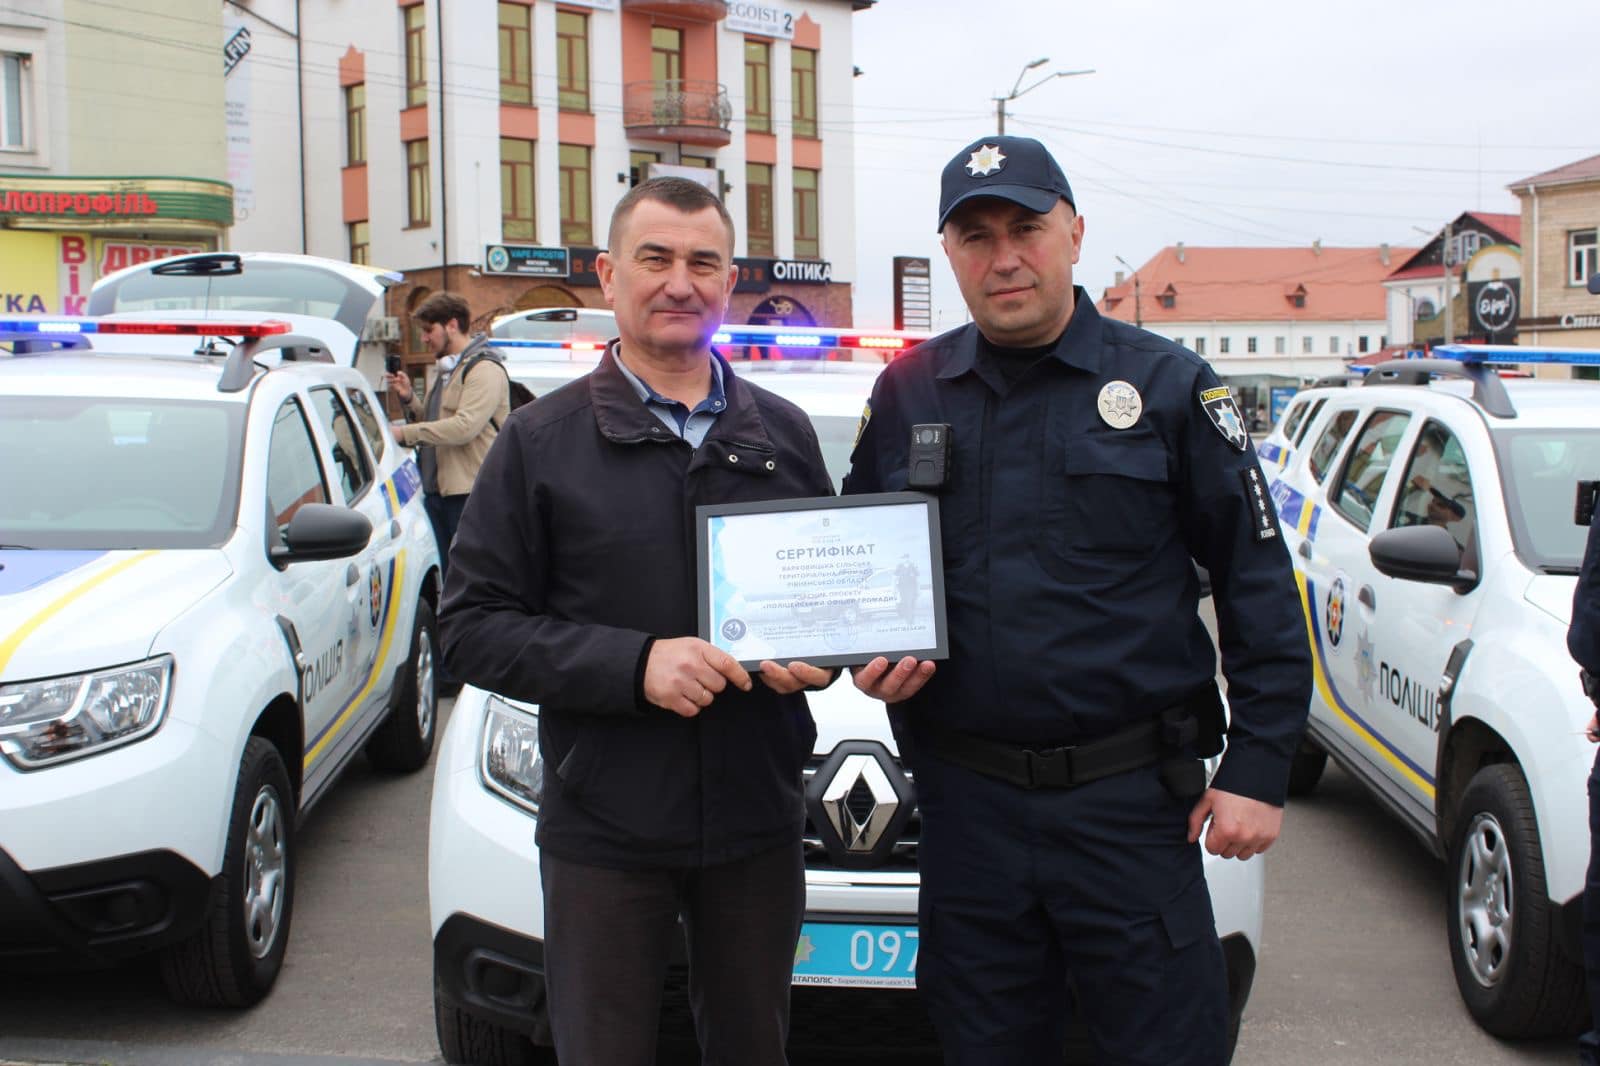 Yurii Parfeniuk (left) with a community police officer